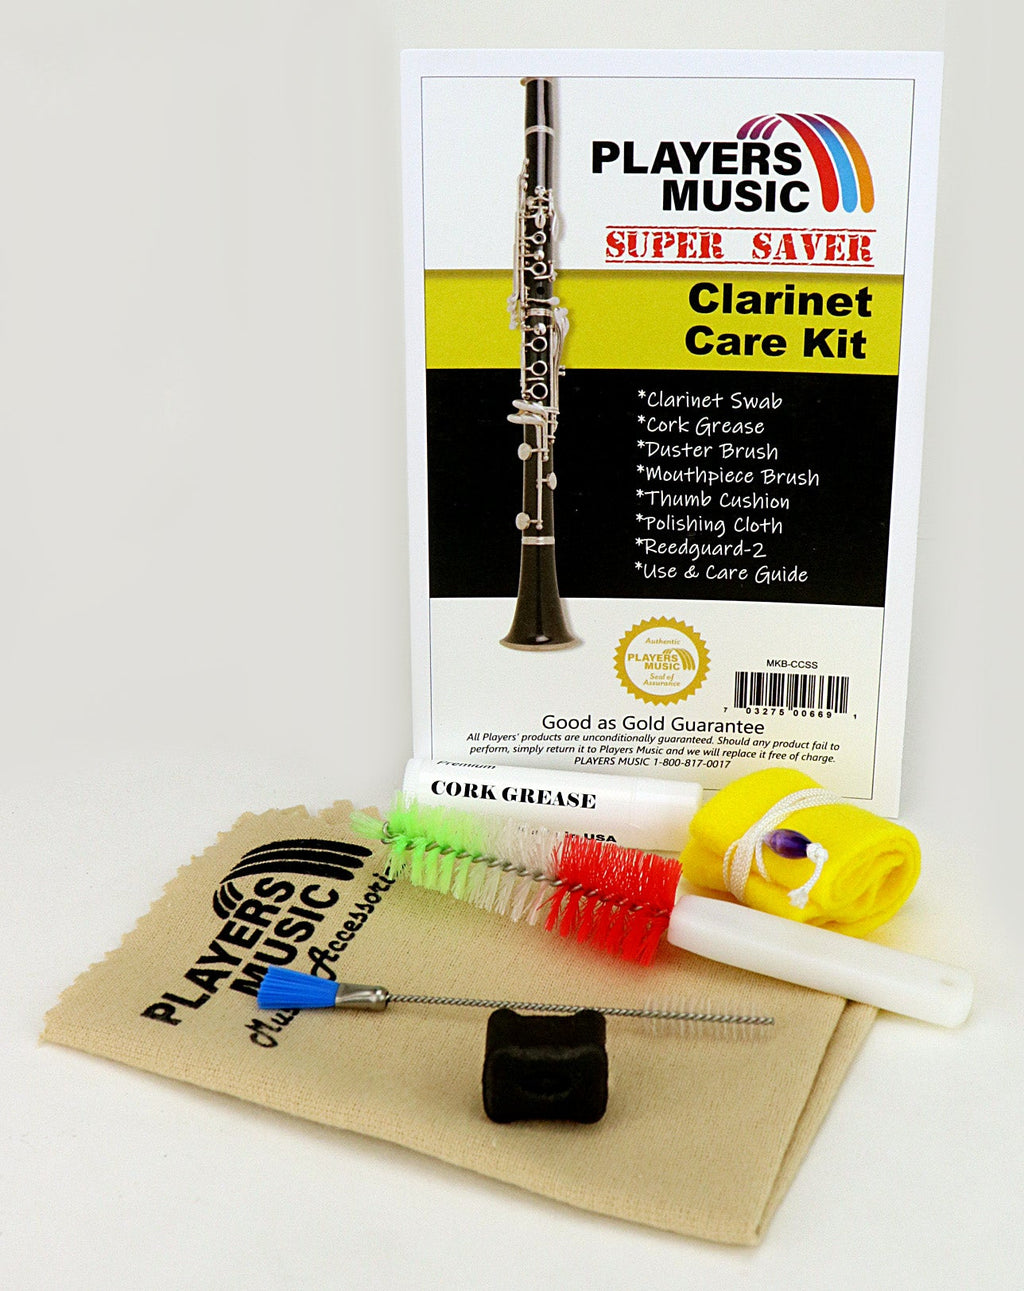 MKB-CCSS Players Music Players Super Saver Care Kit For Clarinets